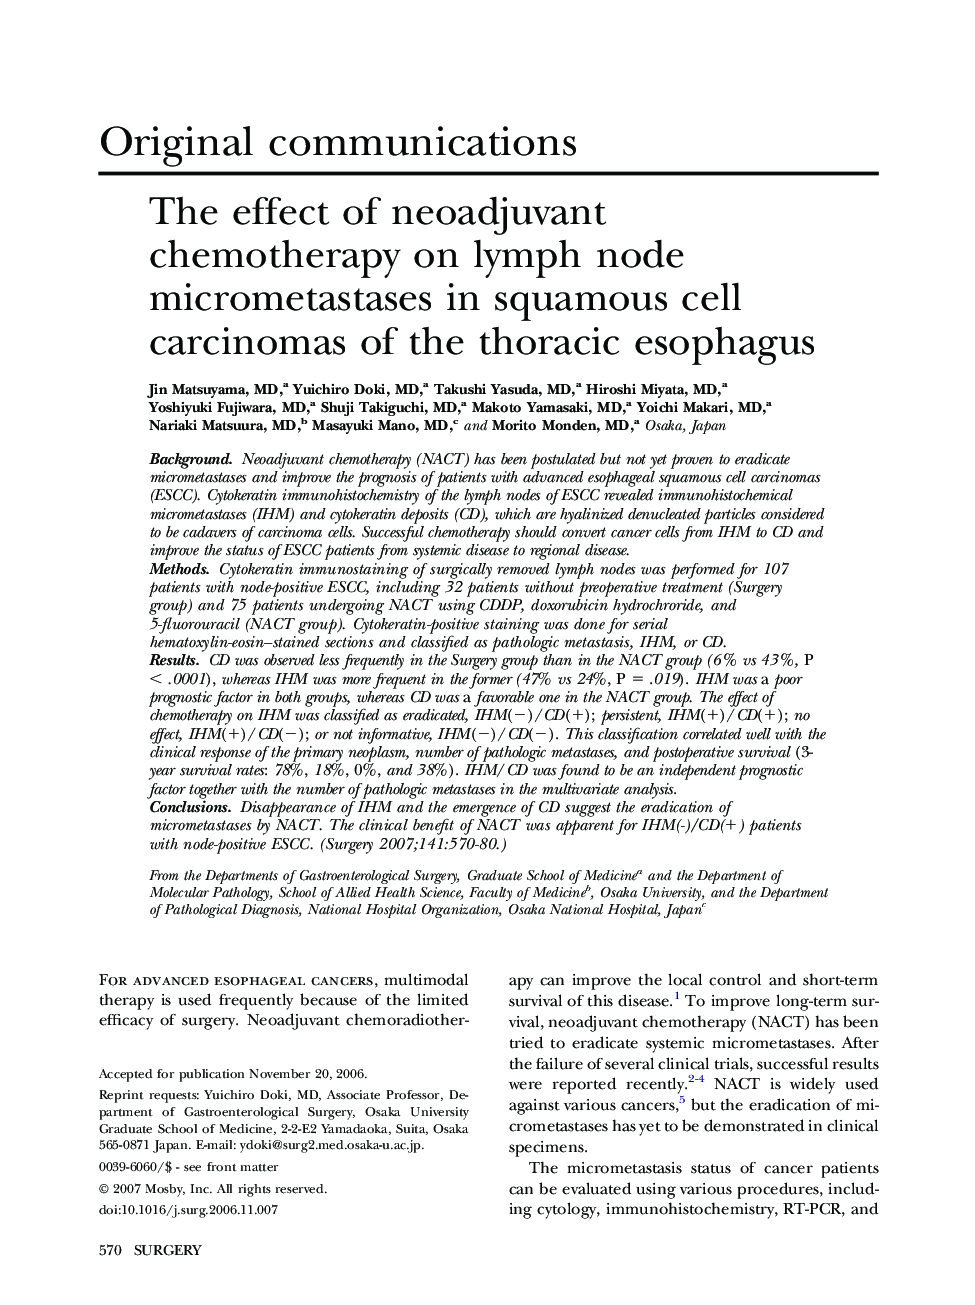 The effect of neoadjuvant chemotherapy on lymph node micrometastases in squamous cell carcinomas of the thoracic esophagus